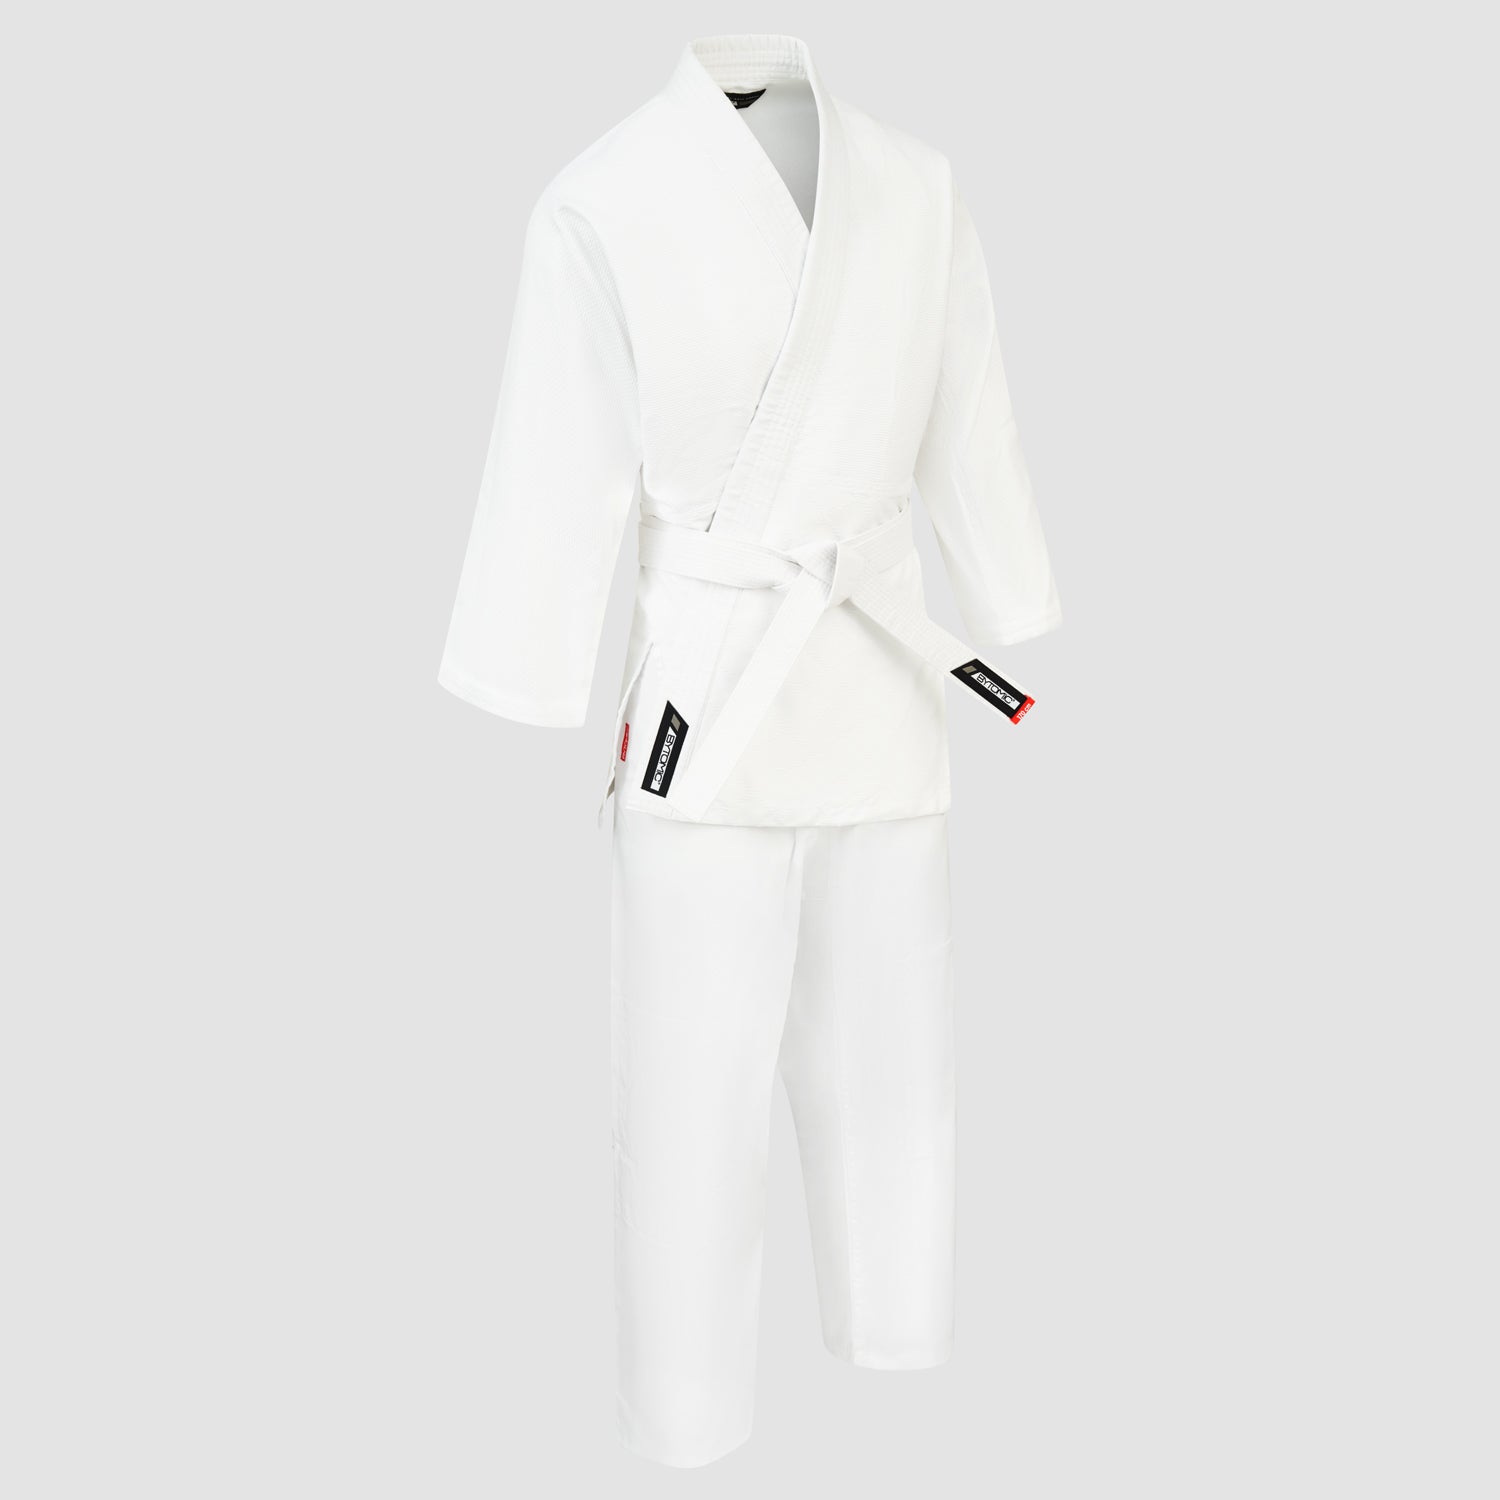 White Bytomic Red Label Adult Judo Uniform 7200 Fight Co